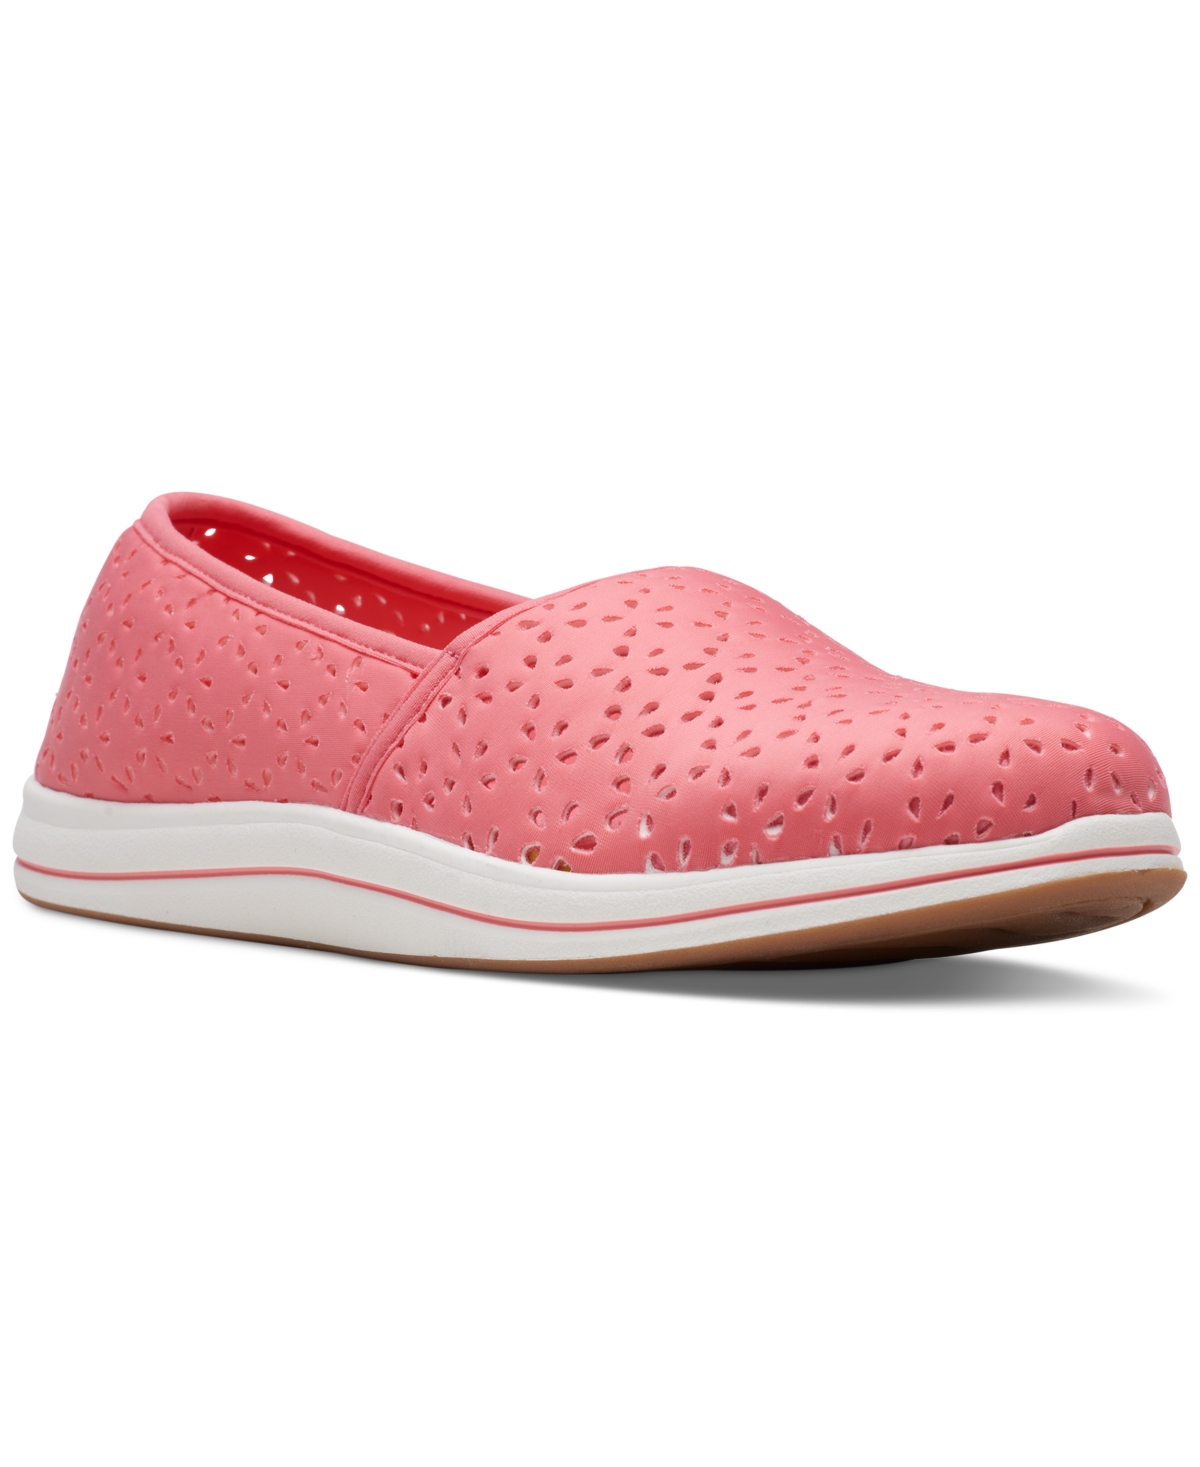 Clarks Women's Cloudsteppers Breeze Emily Perforated Loafer Flats Women ...